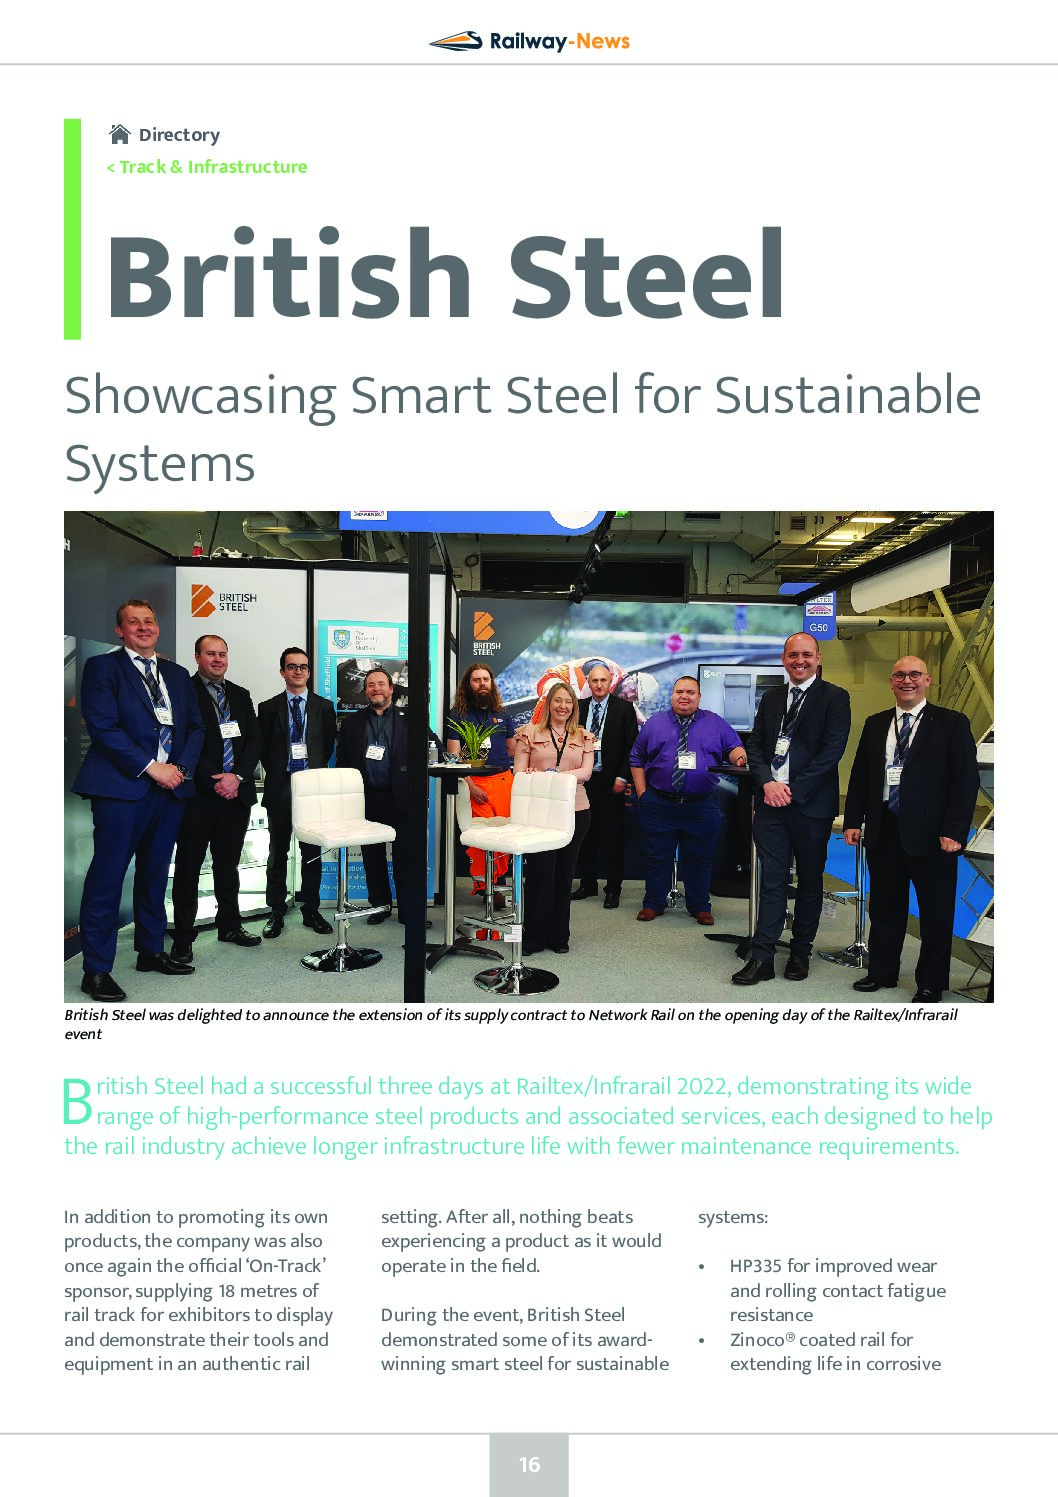 Showcasing Smart Steel for Sustainable Systems